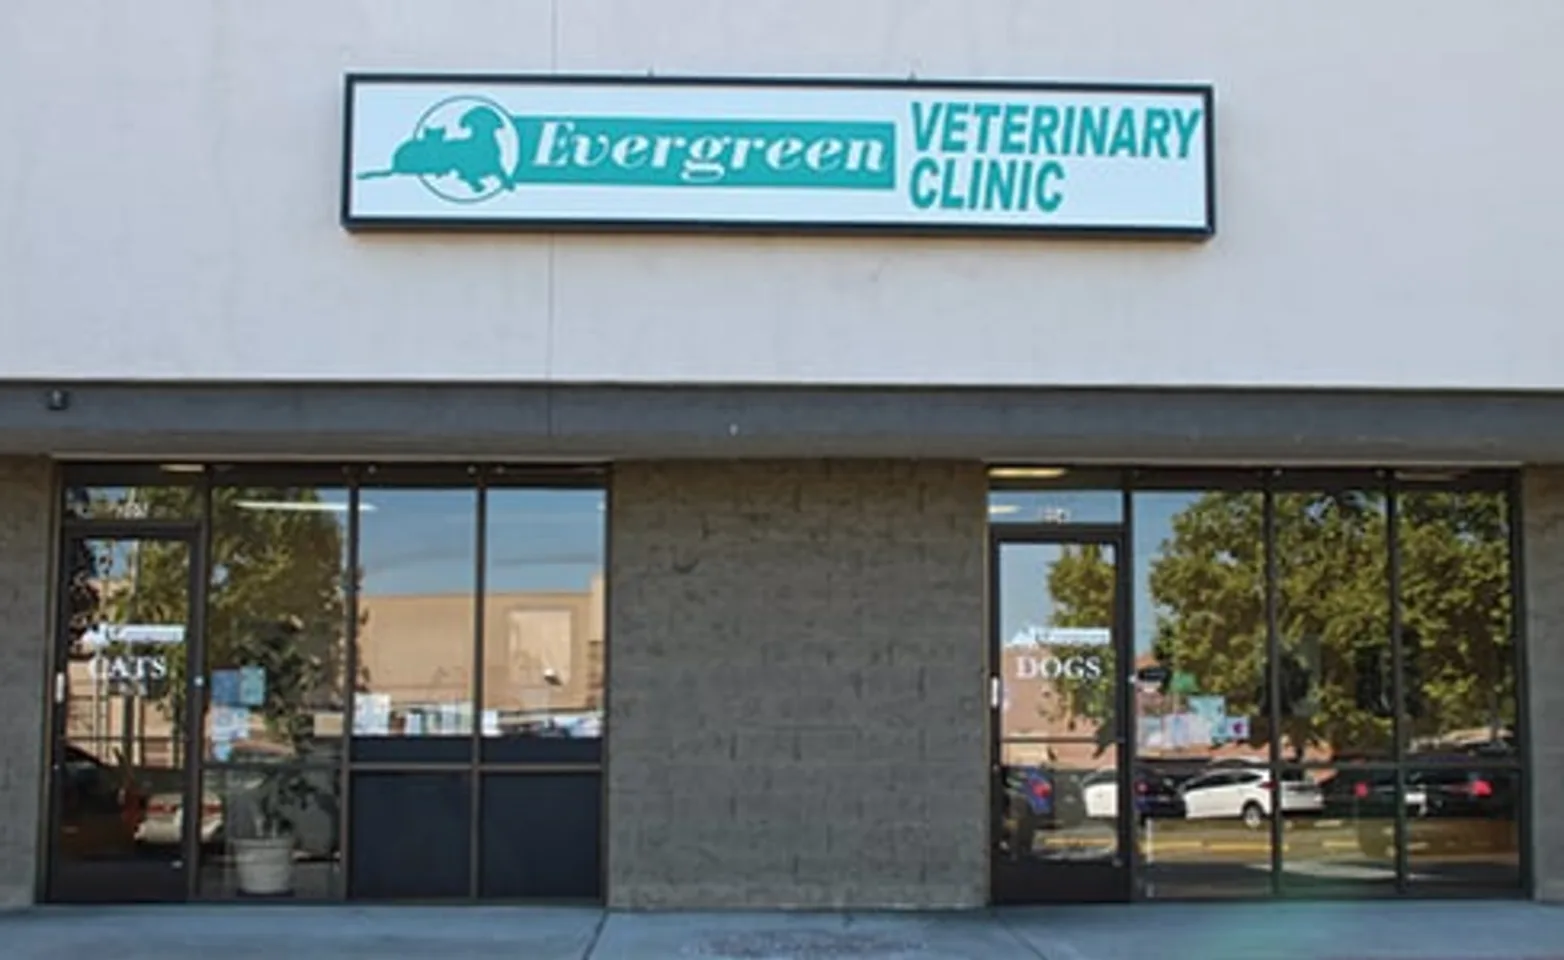 Front view of Evergreen Veterinary Clinic.